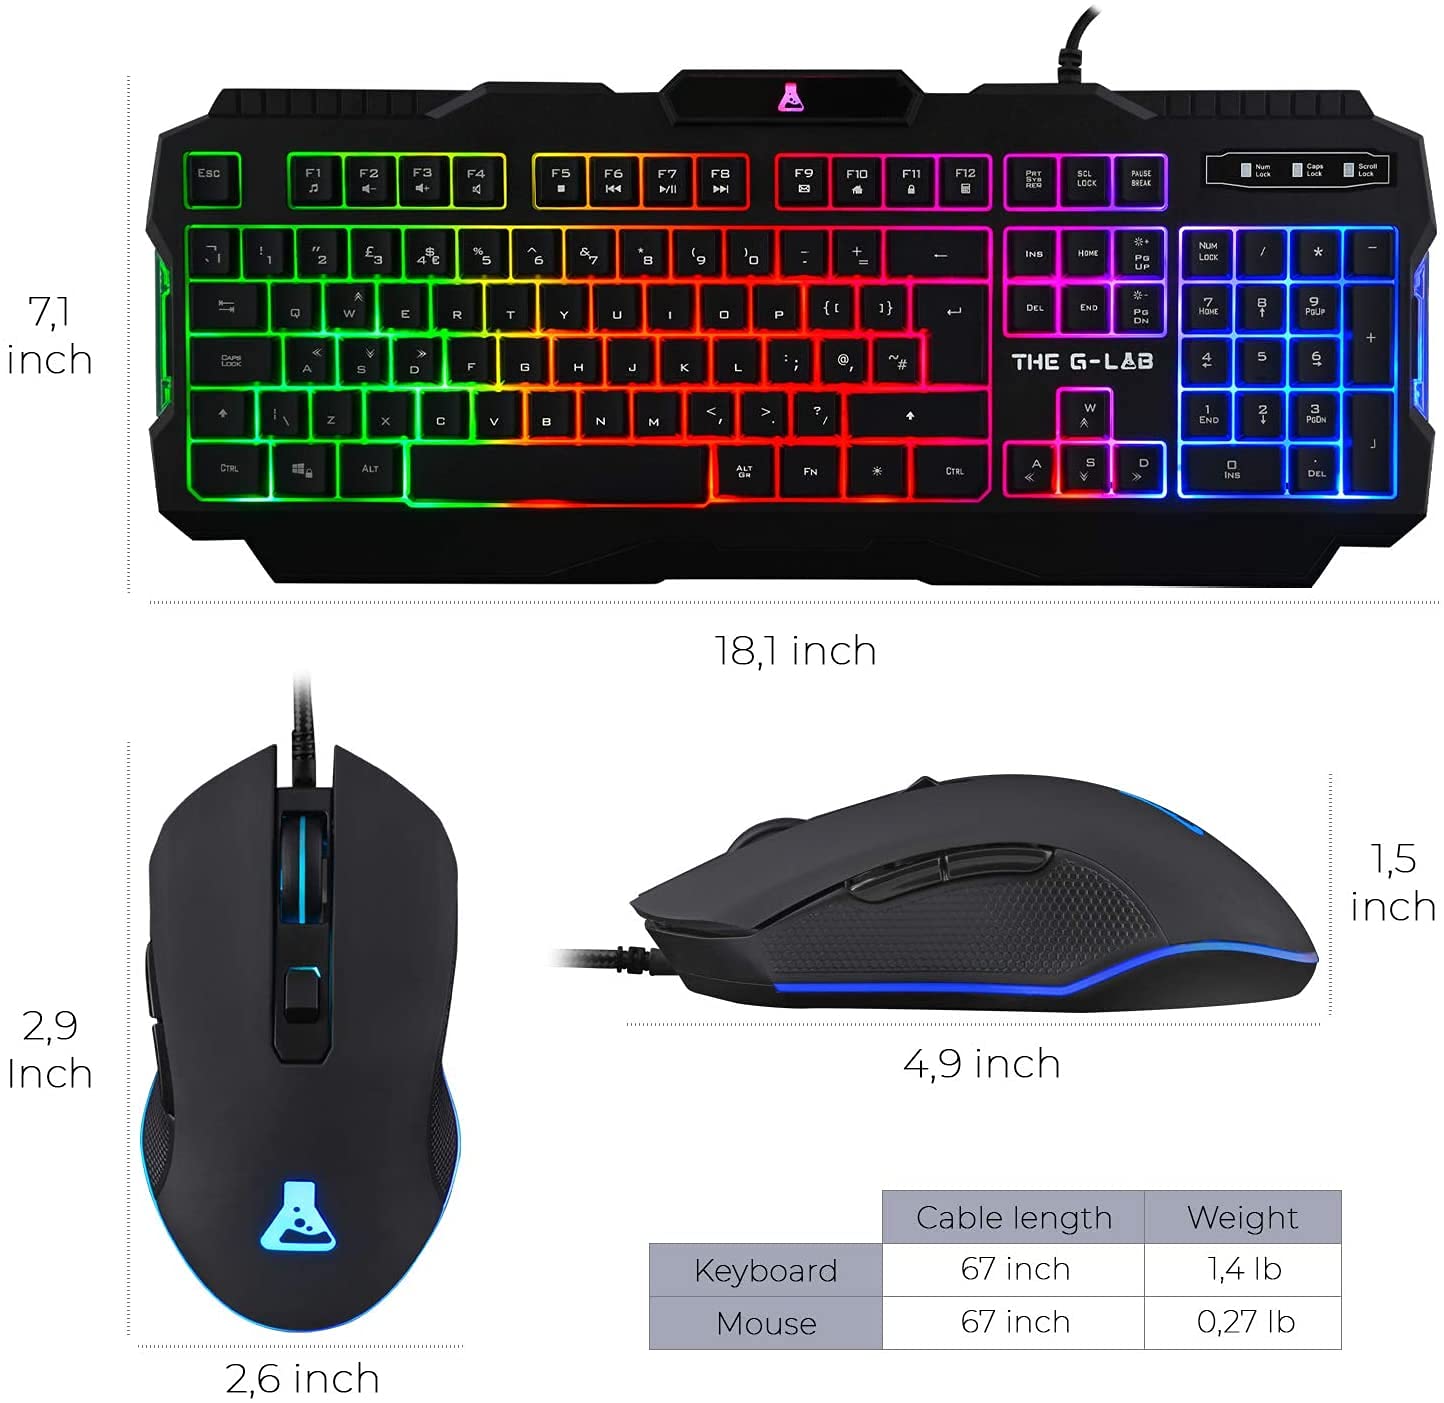 G-LAB Combo Helium - 4-in-1 Gaming Bundle - Backlit QWERTY Gamer Keyboard, 3200 DPI Gaming Mouse, in-Ear Headphones, Non-Slip Mouse Pad - PC Mac PS4 PS5 Xbox One Gamer Pack